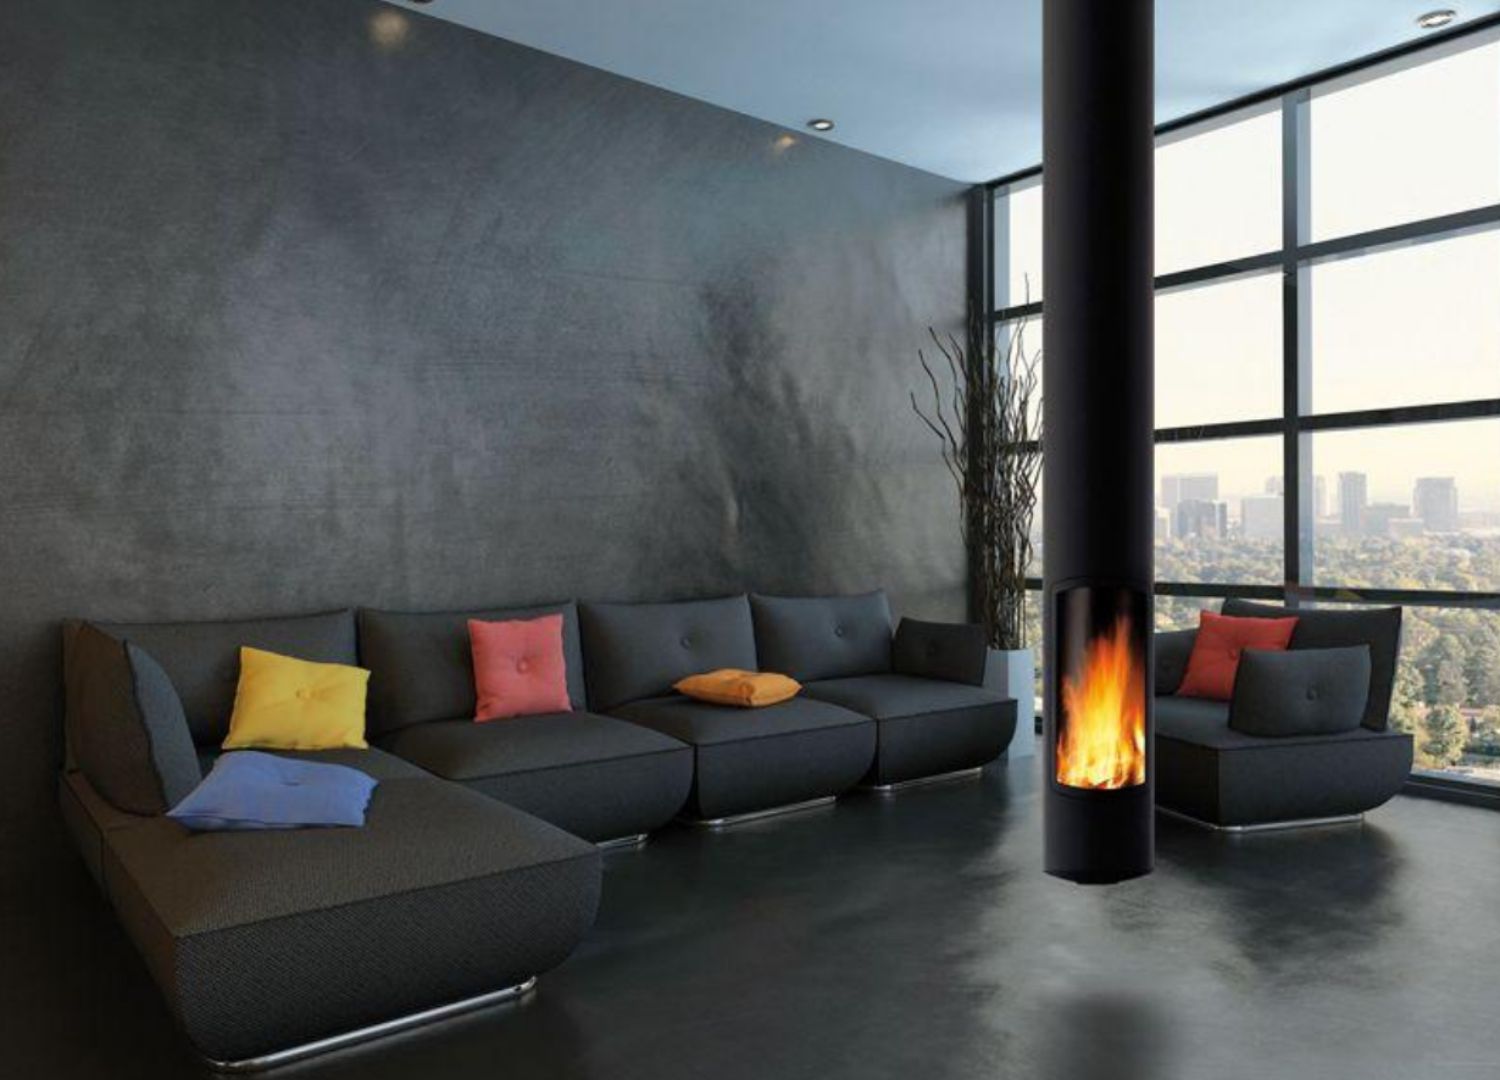 Slimfocus Suspended by Focus Fireplaces - Modern fireplaces